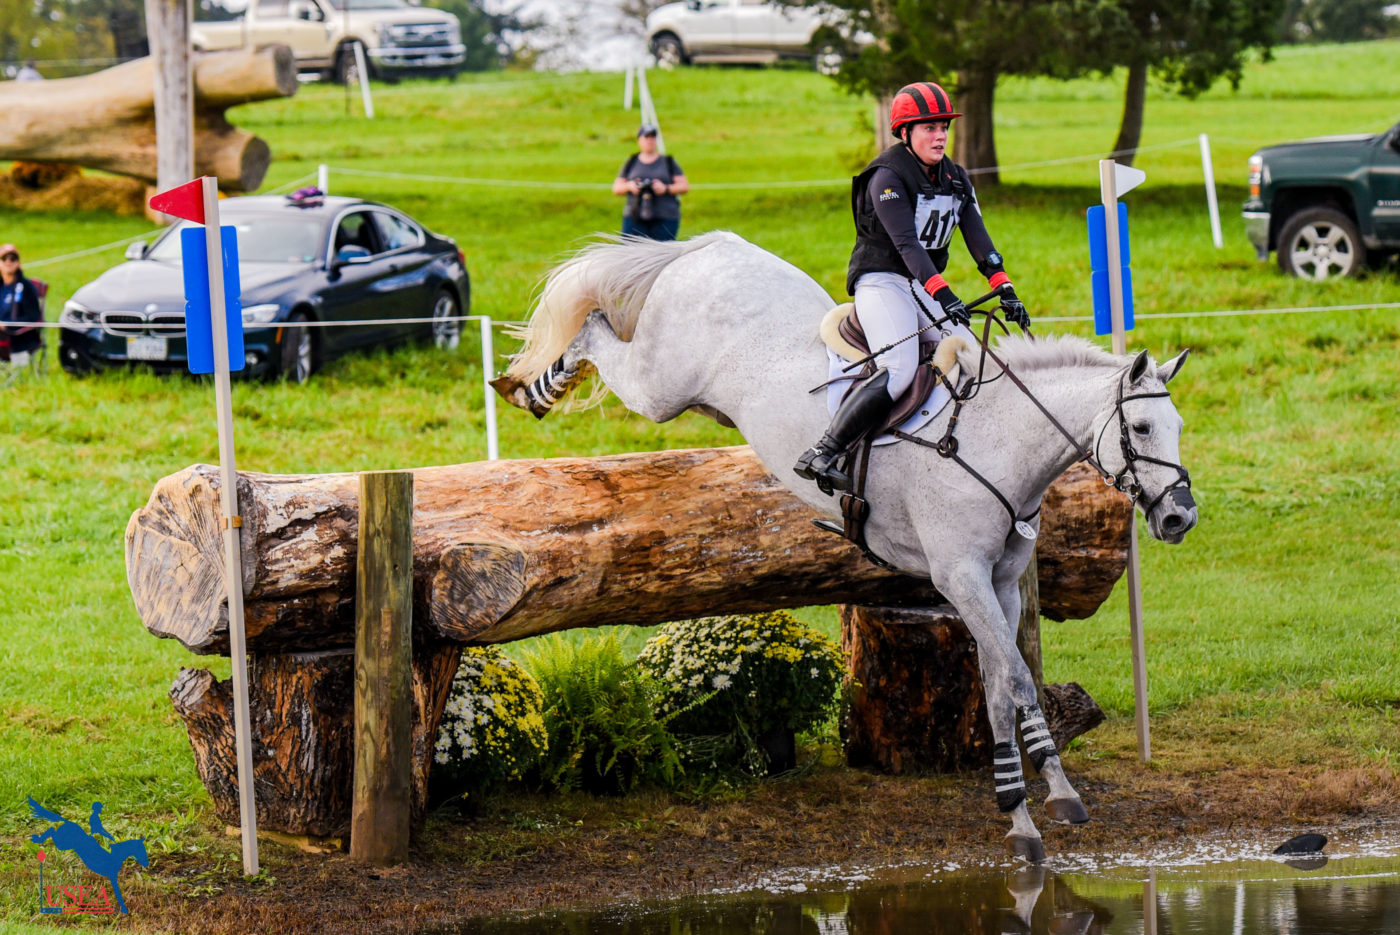 CCI4*-L - 12th - Andi Lawrence & Cooley Northern Mist